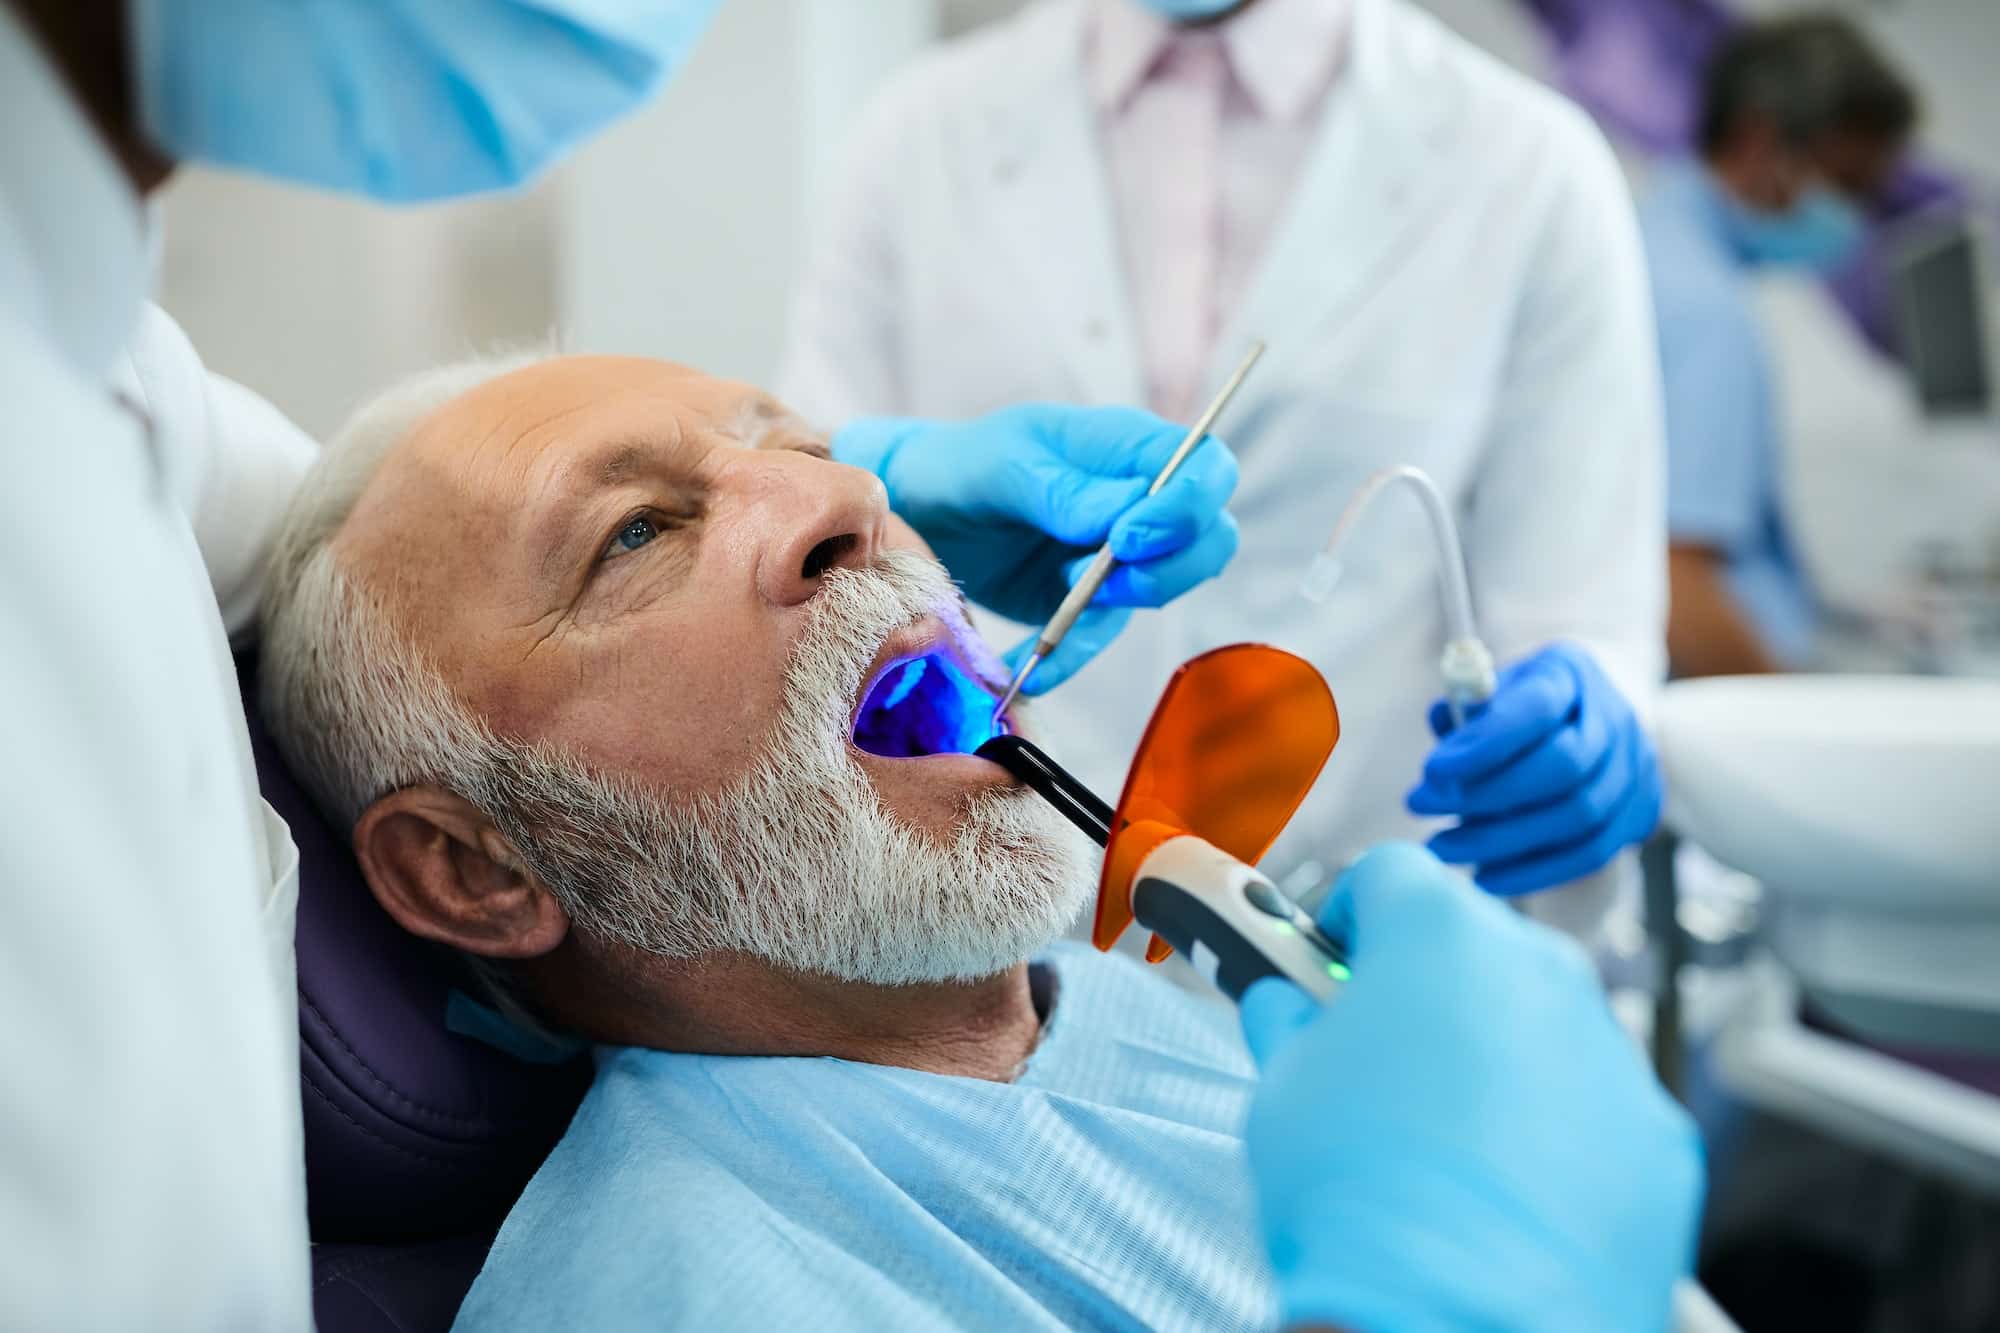 Mature man during dental filling drying procedure with curing UV light at dental clinic.